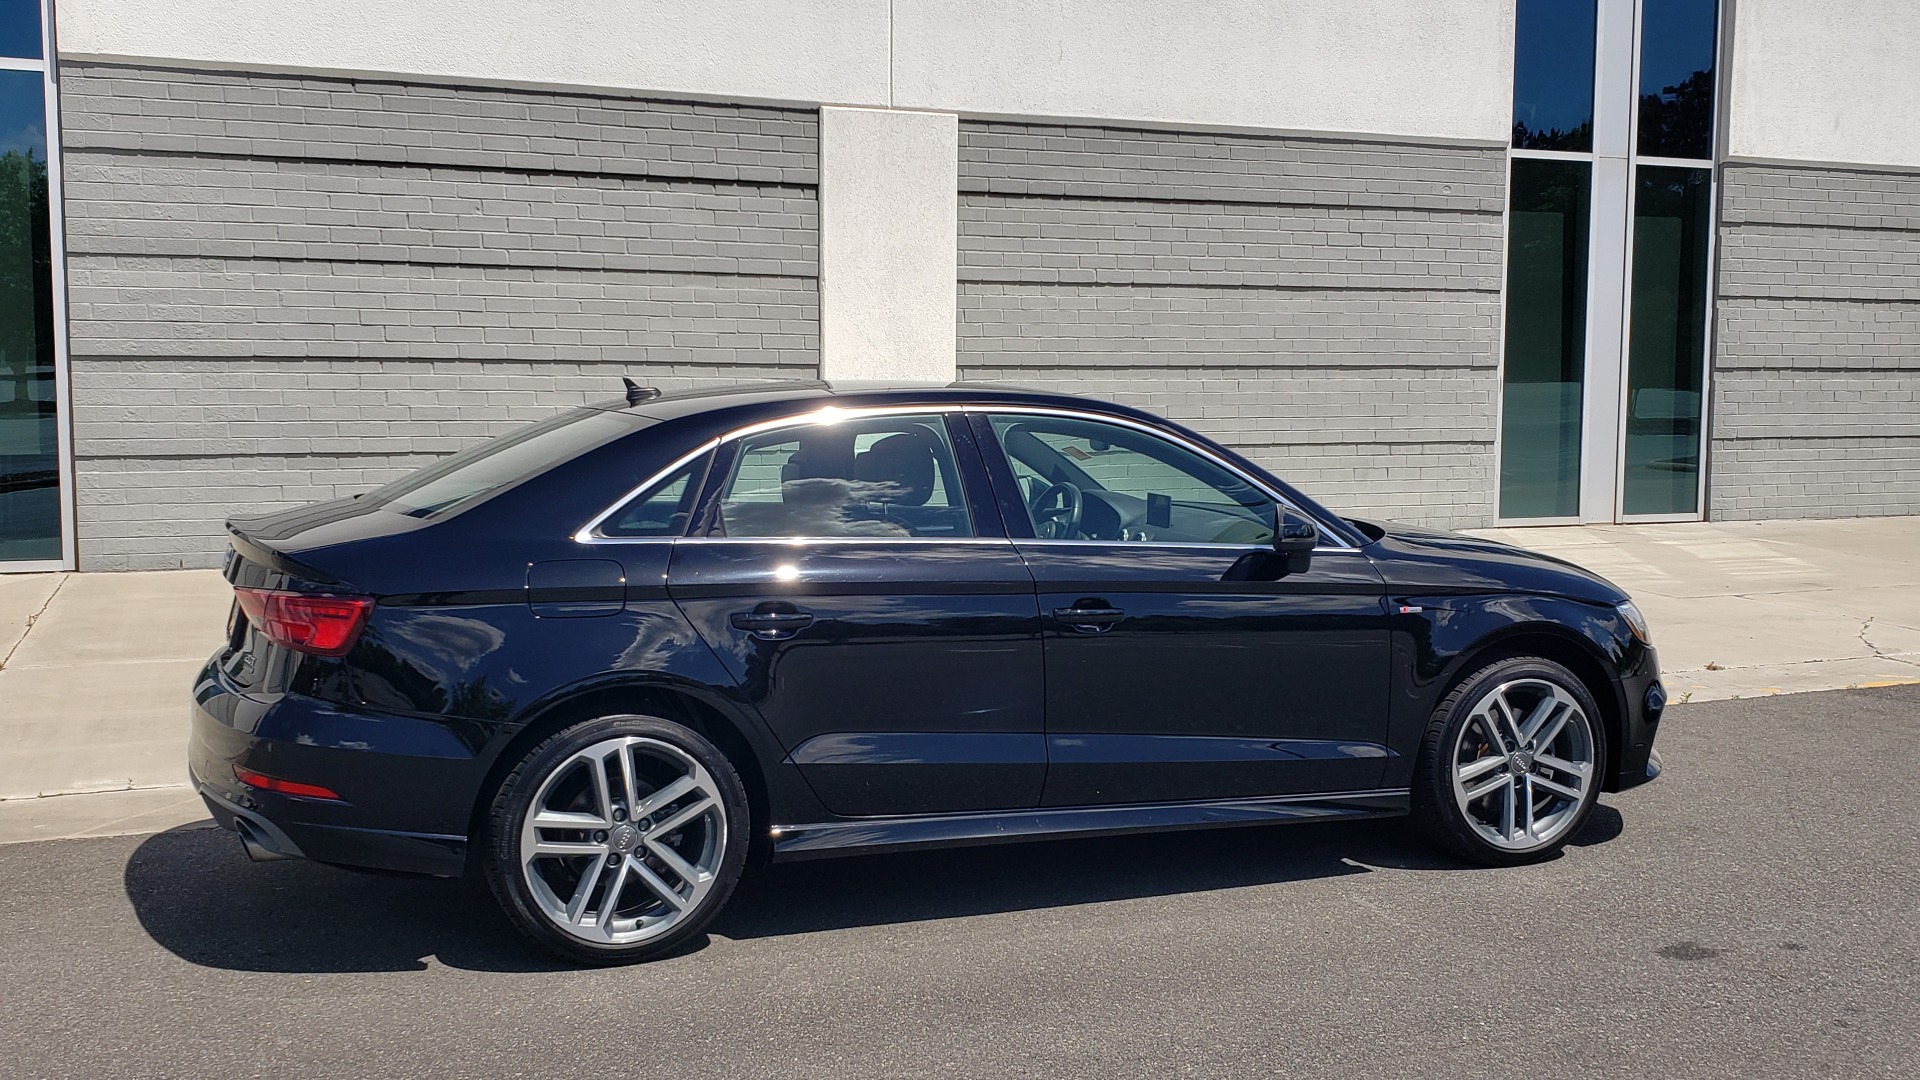 Used 2018 Audi A3 SEDAN PREMIUM PLUS / NAV / PANO-ROOF / B&O SND / LED PKG / REARVIEW for sale Sold at Formula Imports in Charlotte NC 28227 8